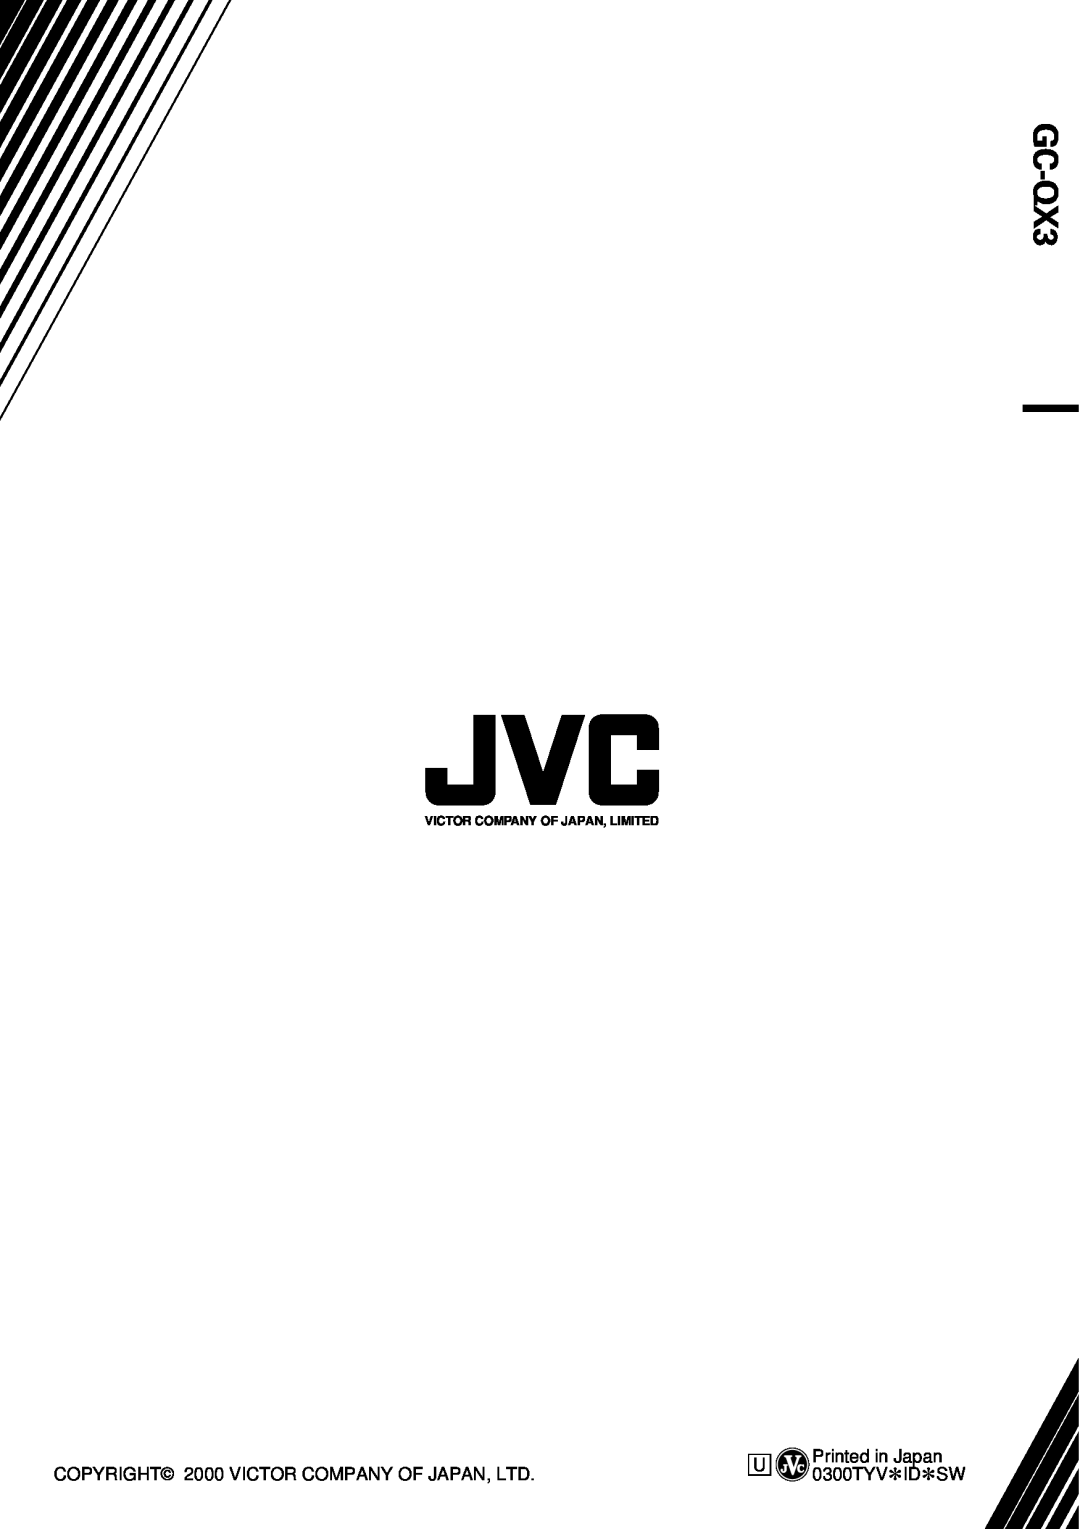 JVC GC-QX3 manual 0300TYV*ID*SW, Victor Company Of Japan, Limited 